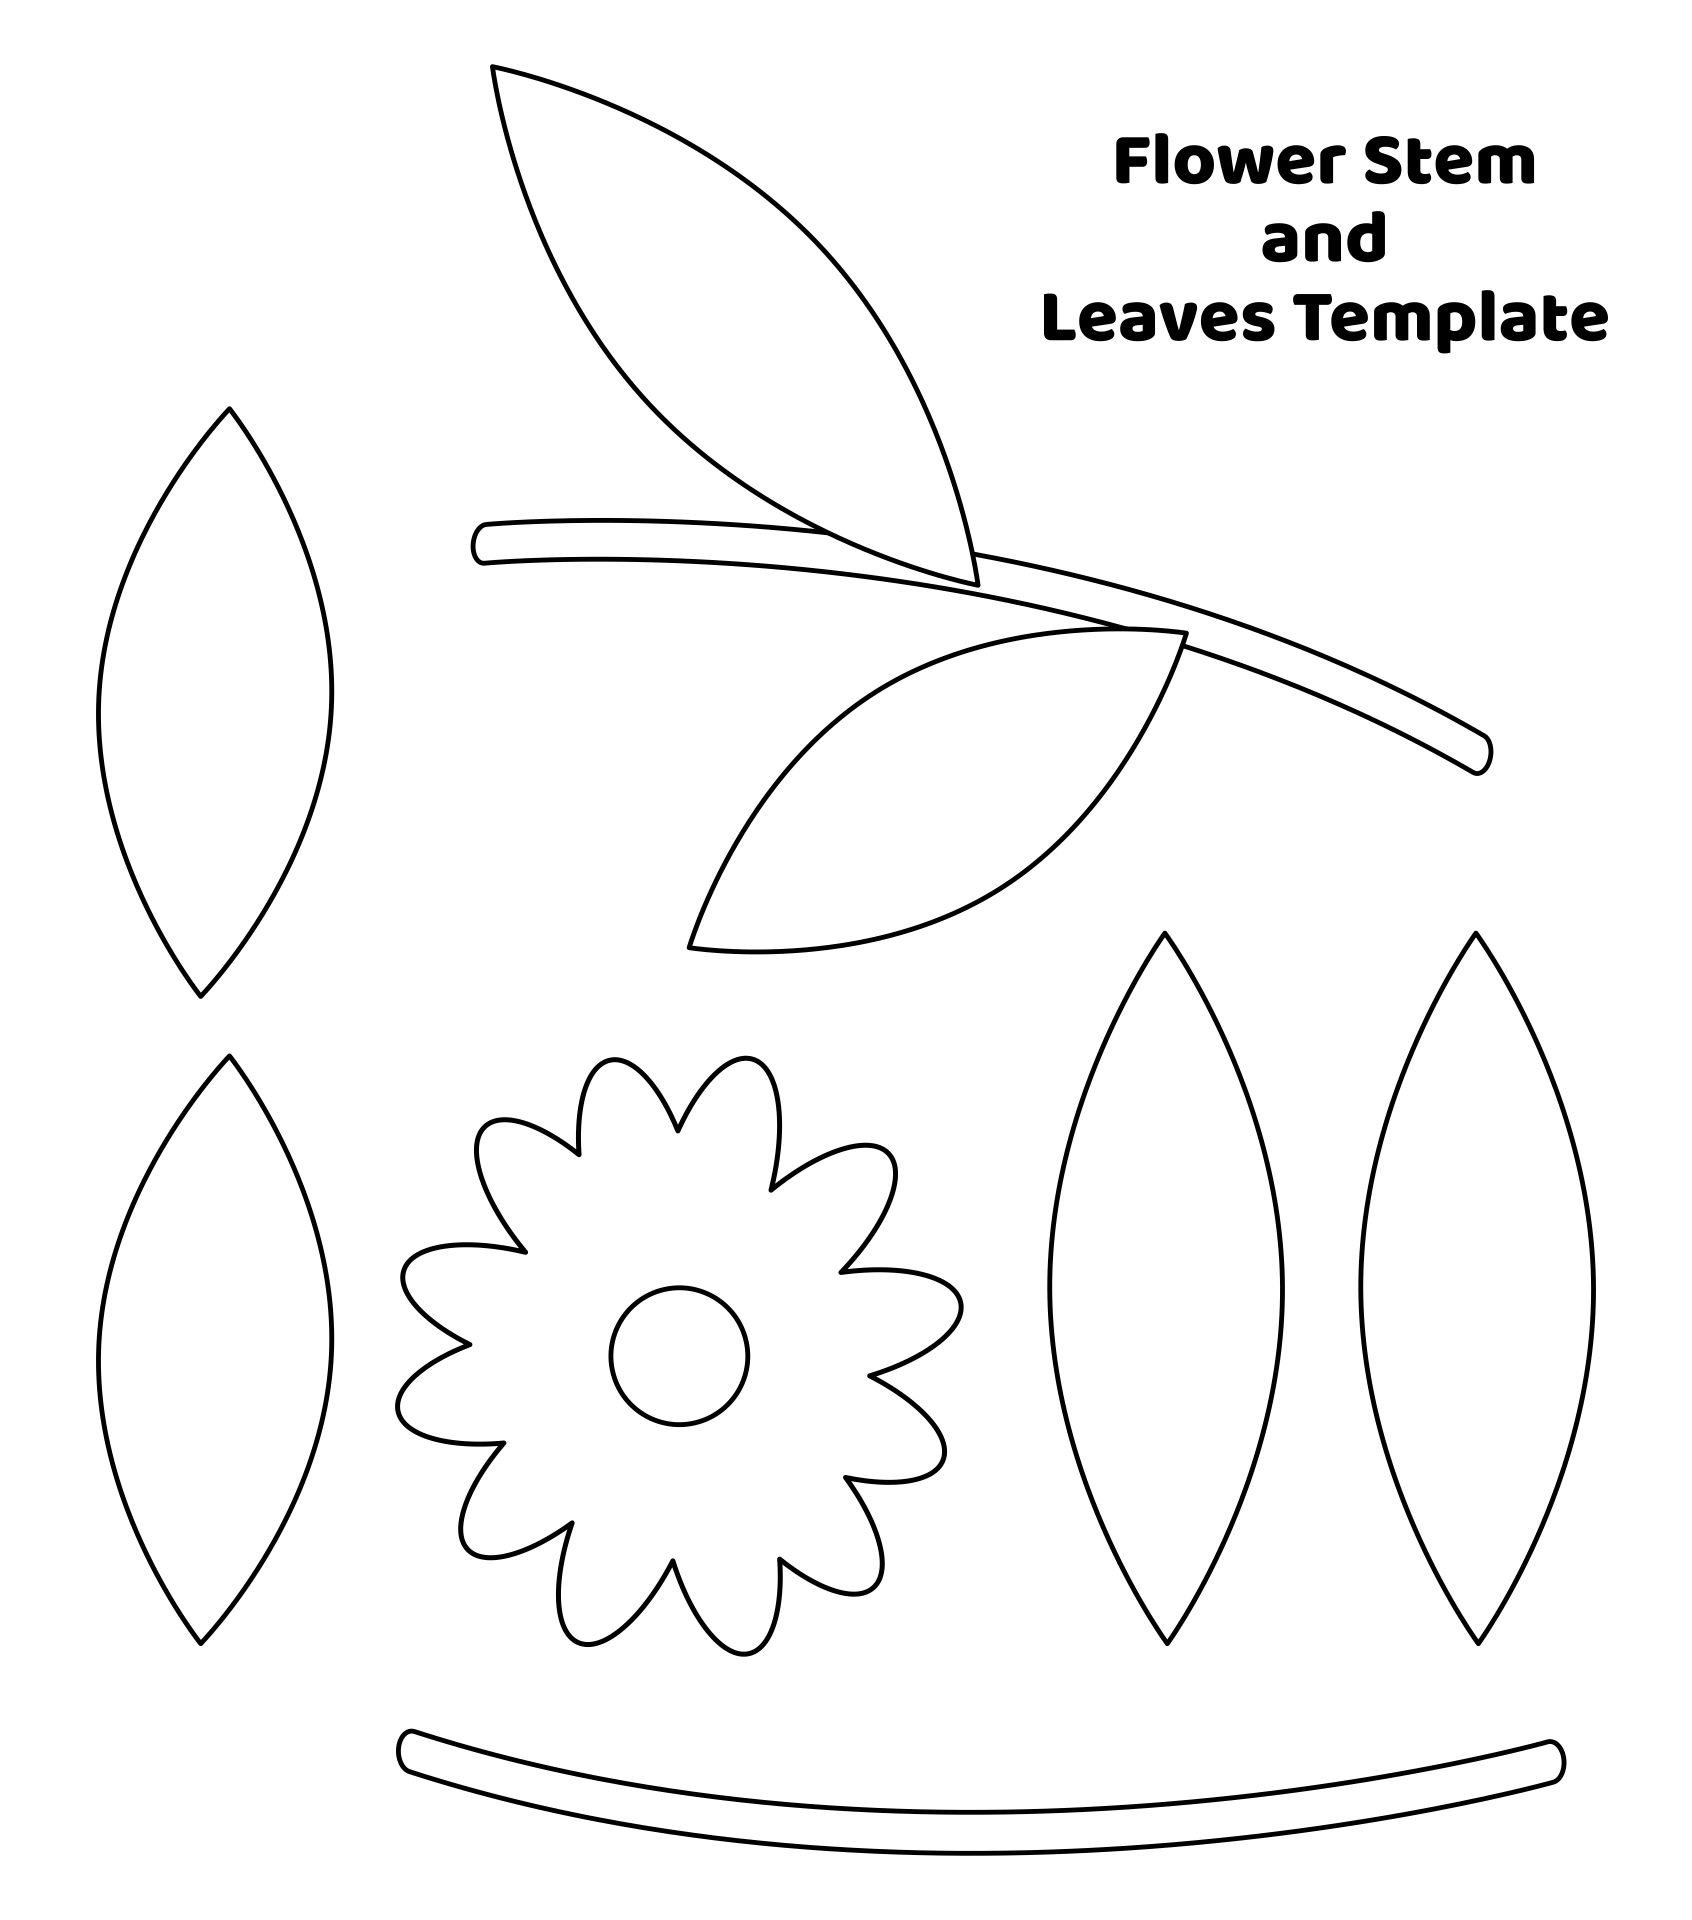 Flower Stem and Leaves Template